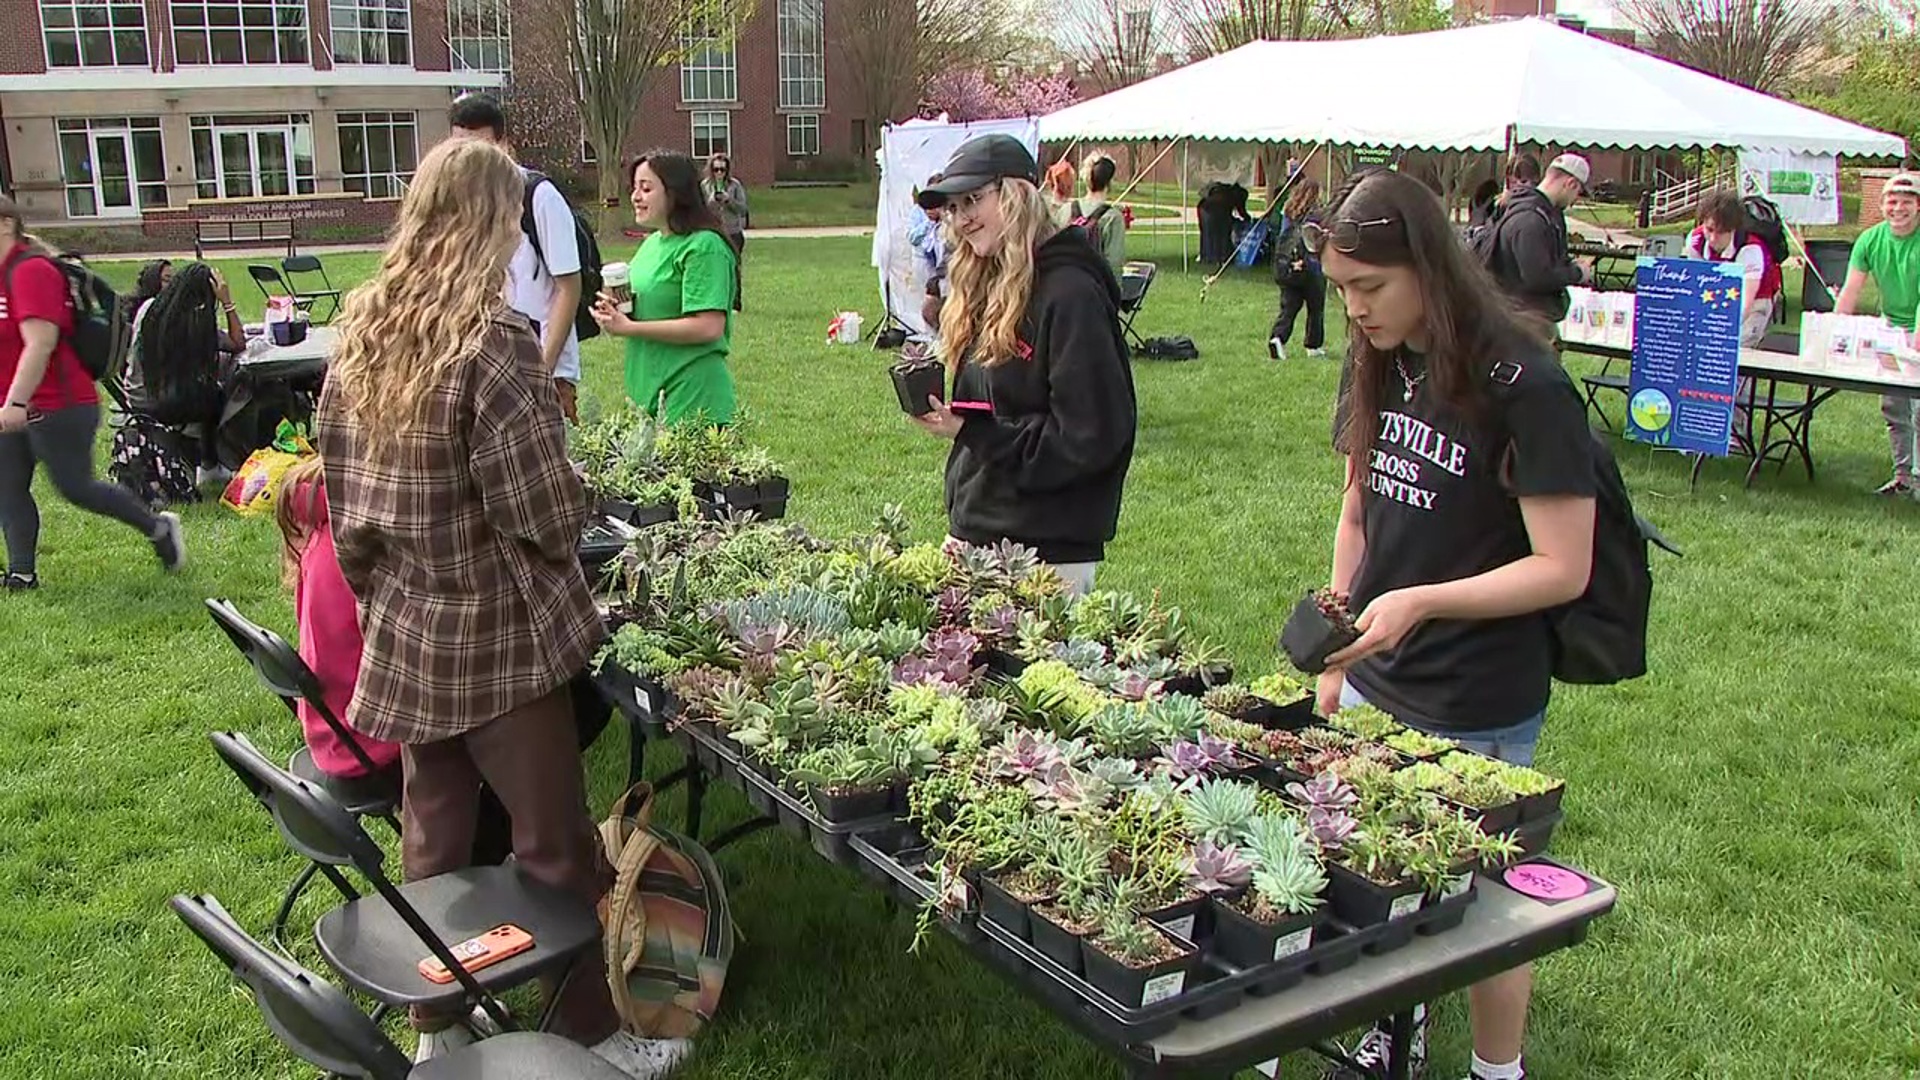 Bloomsburg University students, faculty, and area businesses came together to celebrate Earth Day with an event on campus.